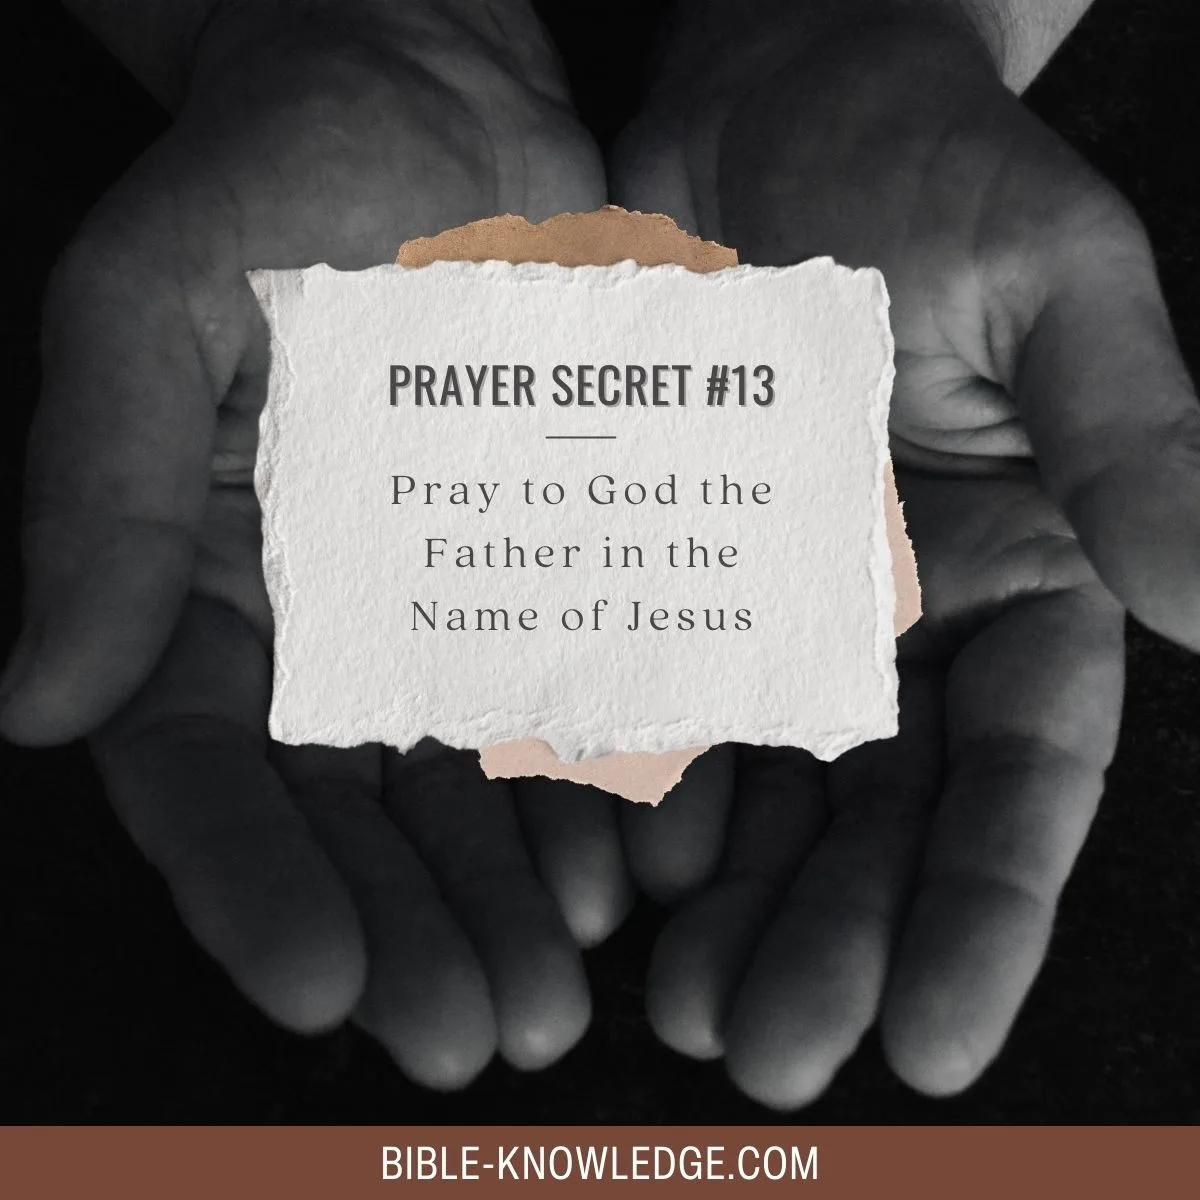 Pray to God the Father in the Name of Jesus